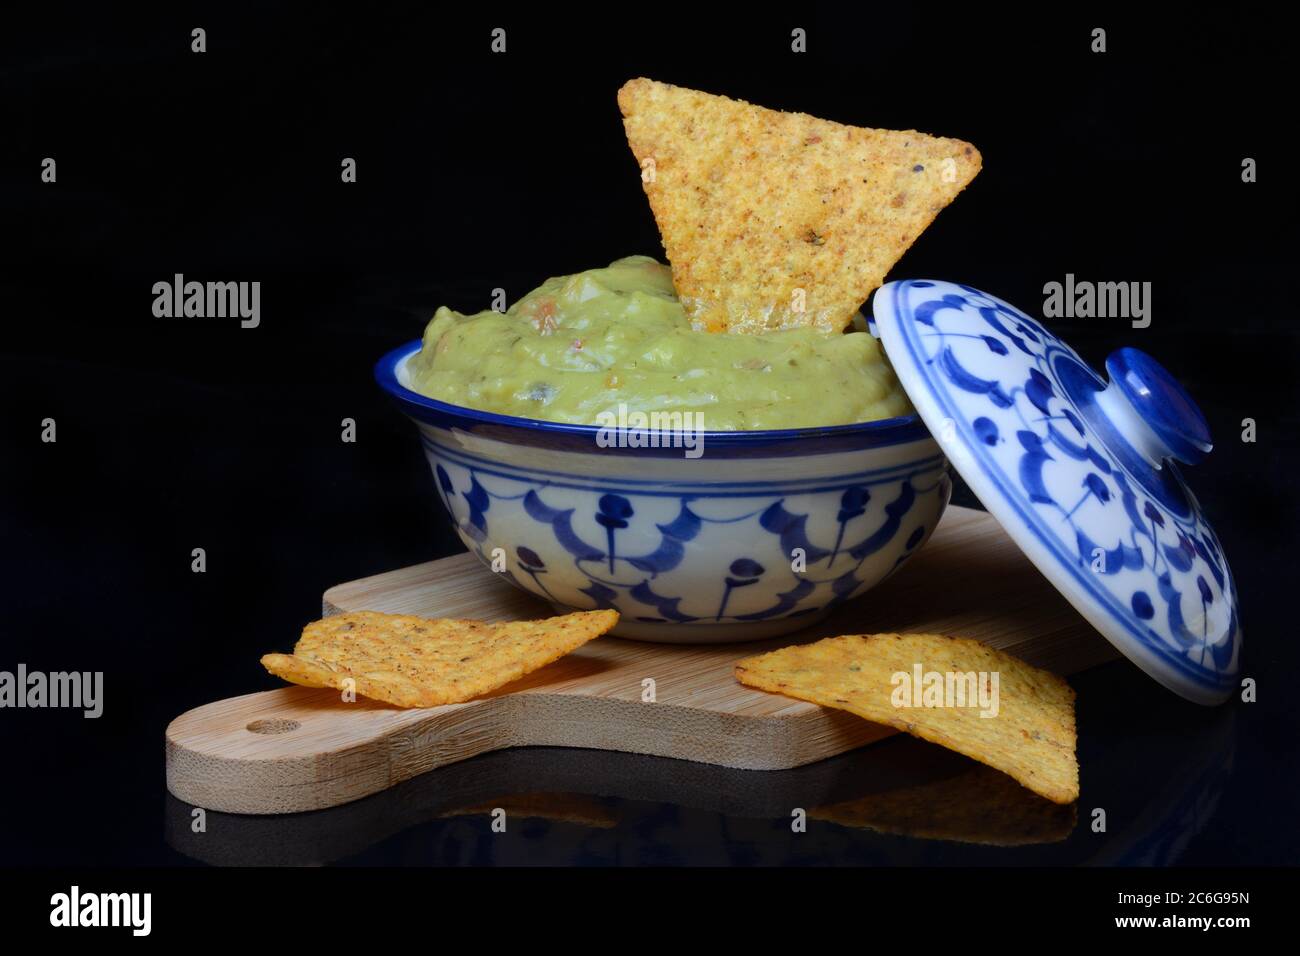 Bowl with guacamole and tortilla chips, Germany Stock Photo